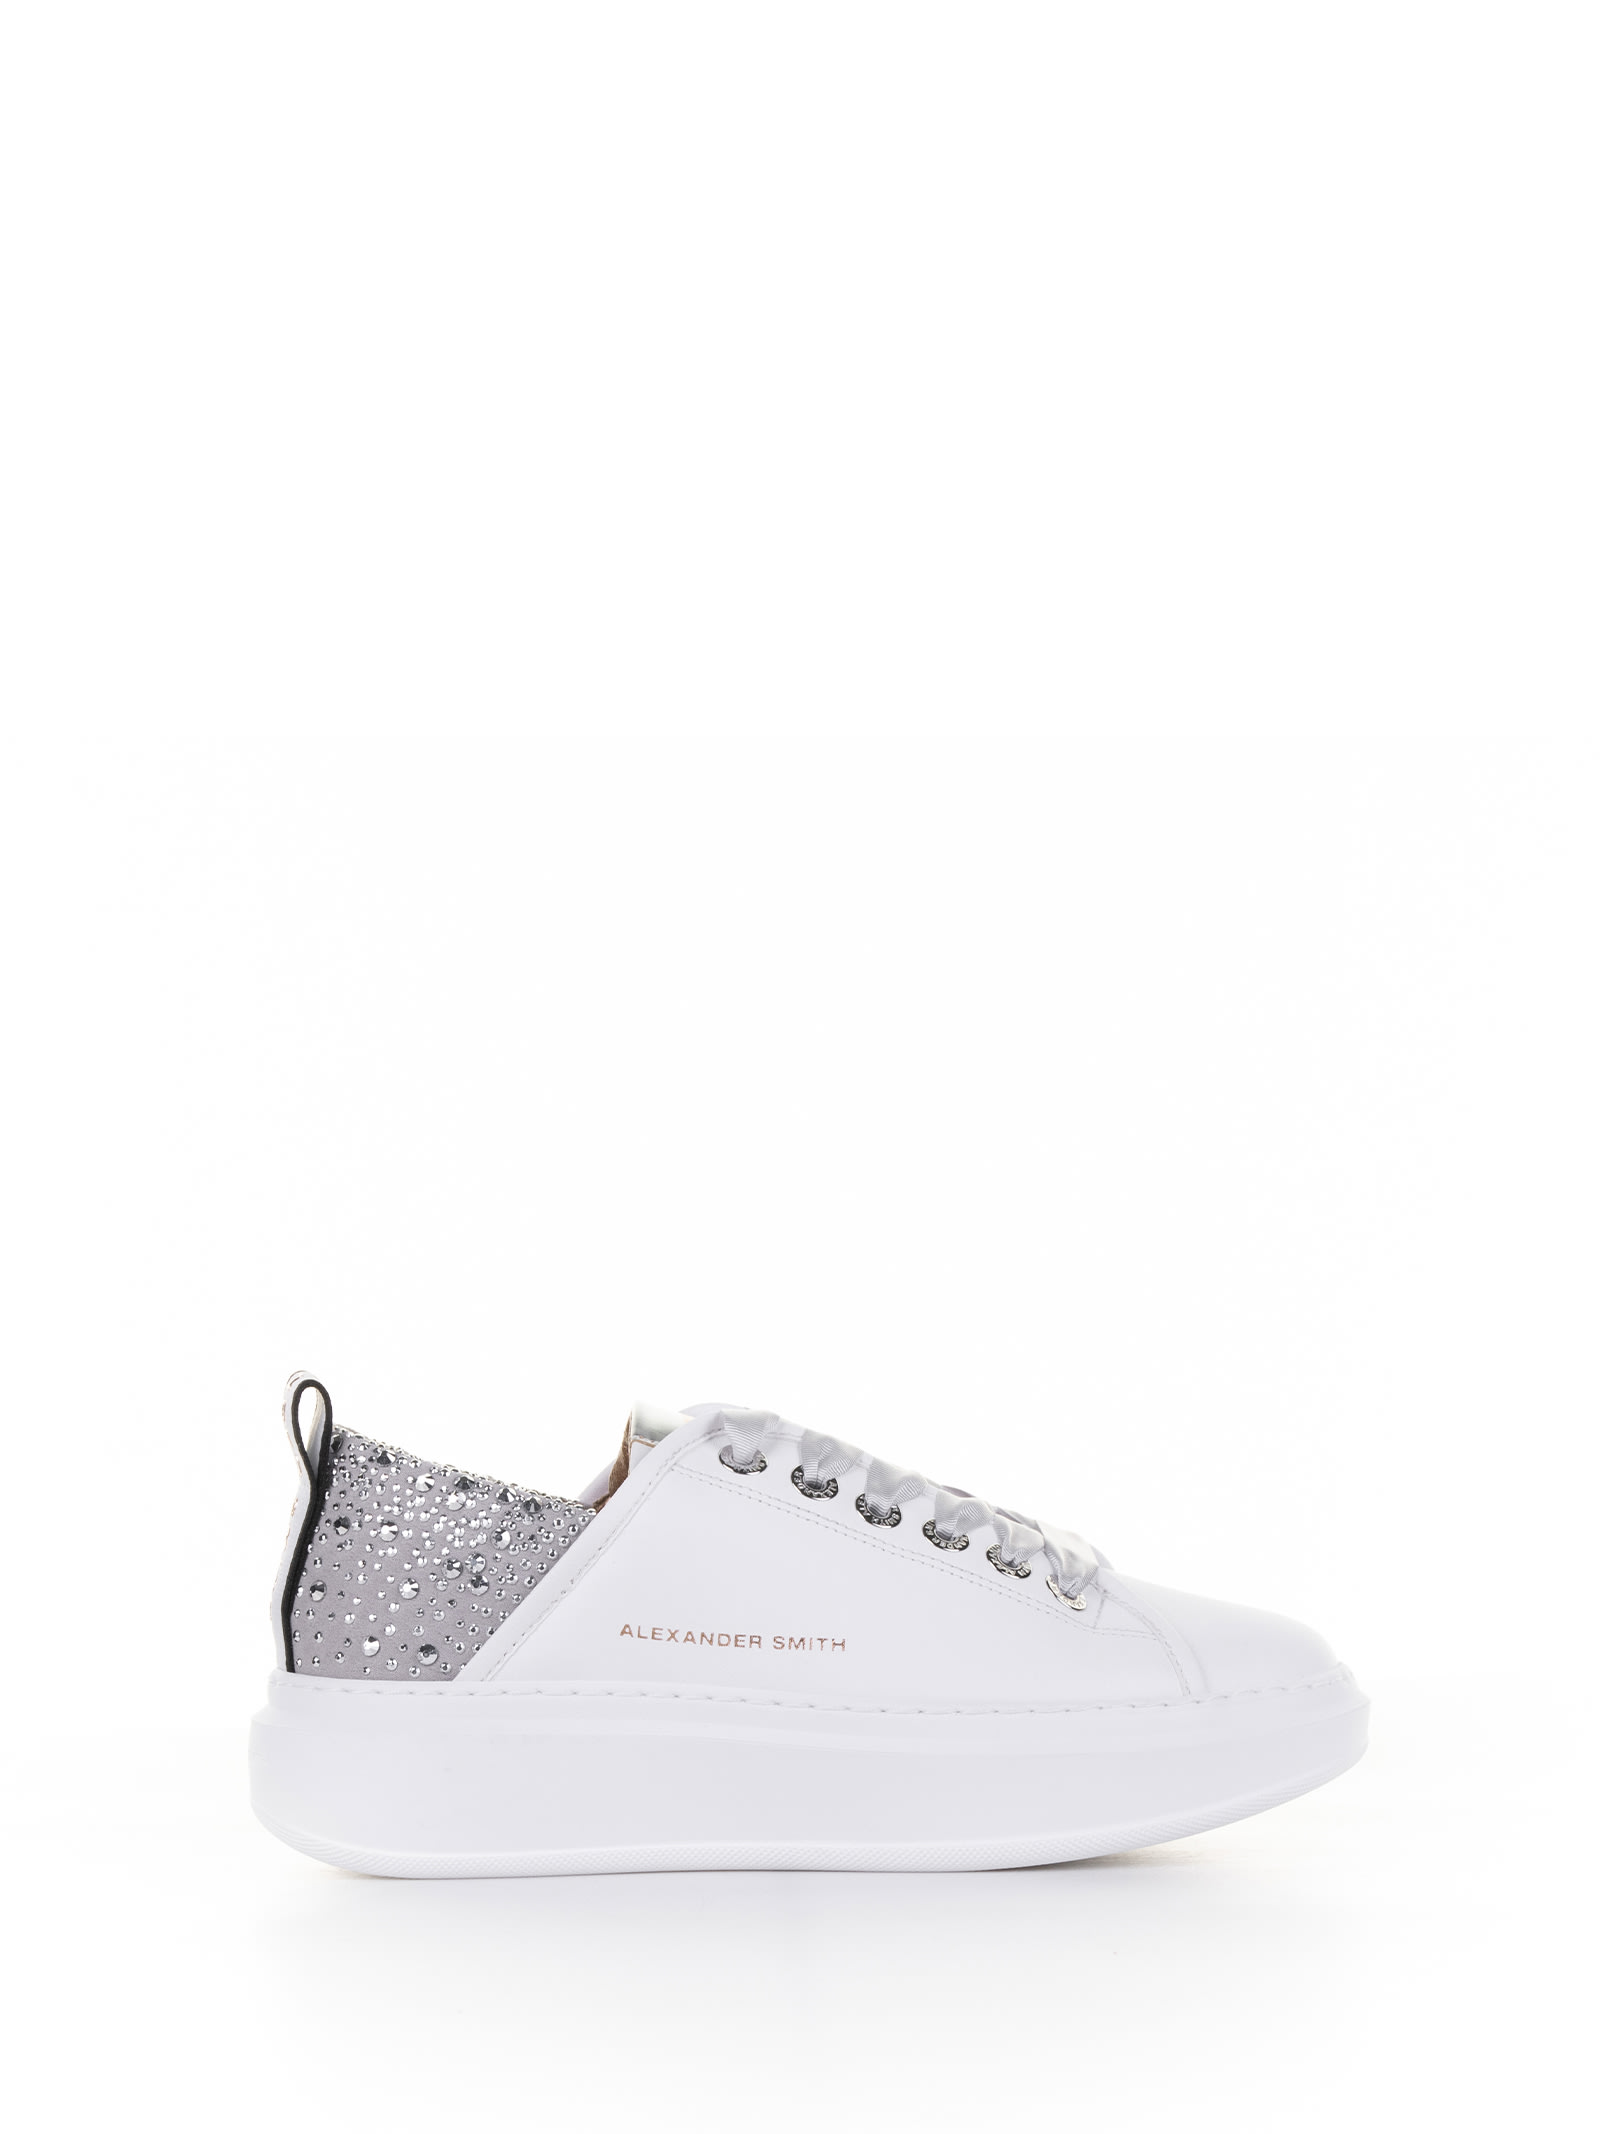 Alexander Smith Wembley Trainer In Leather And Rhinestones In White Siver